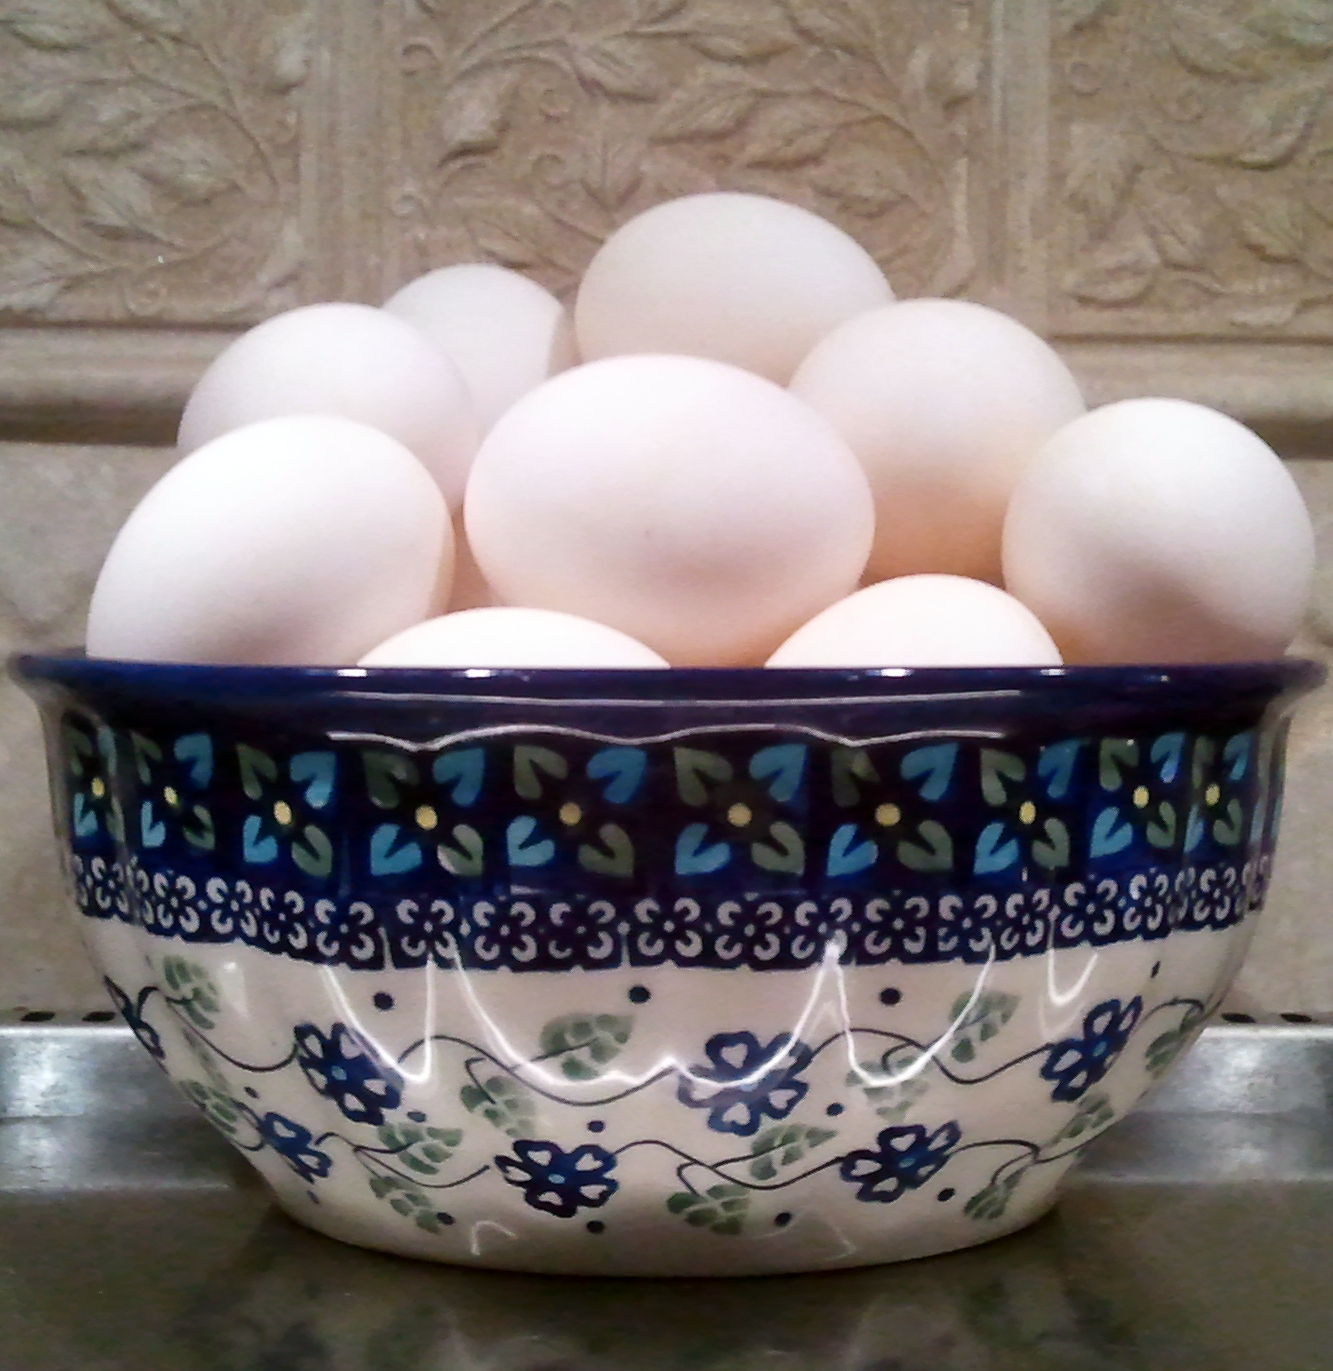 Dyeing Easter Eggs...Naturally | Fresh Eggs Daily®